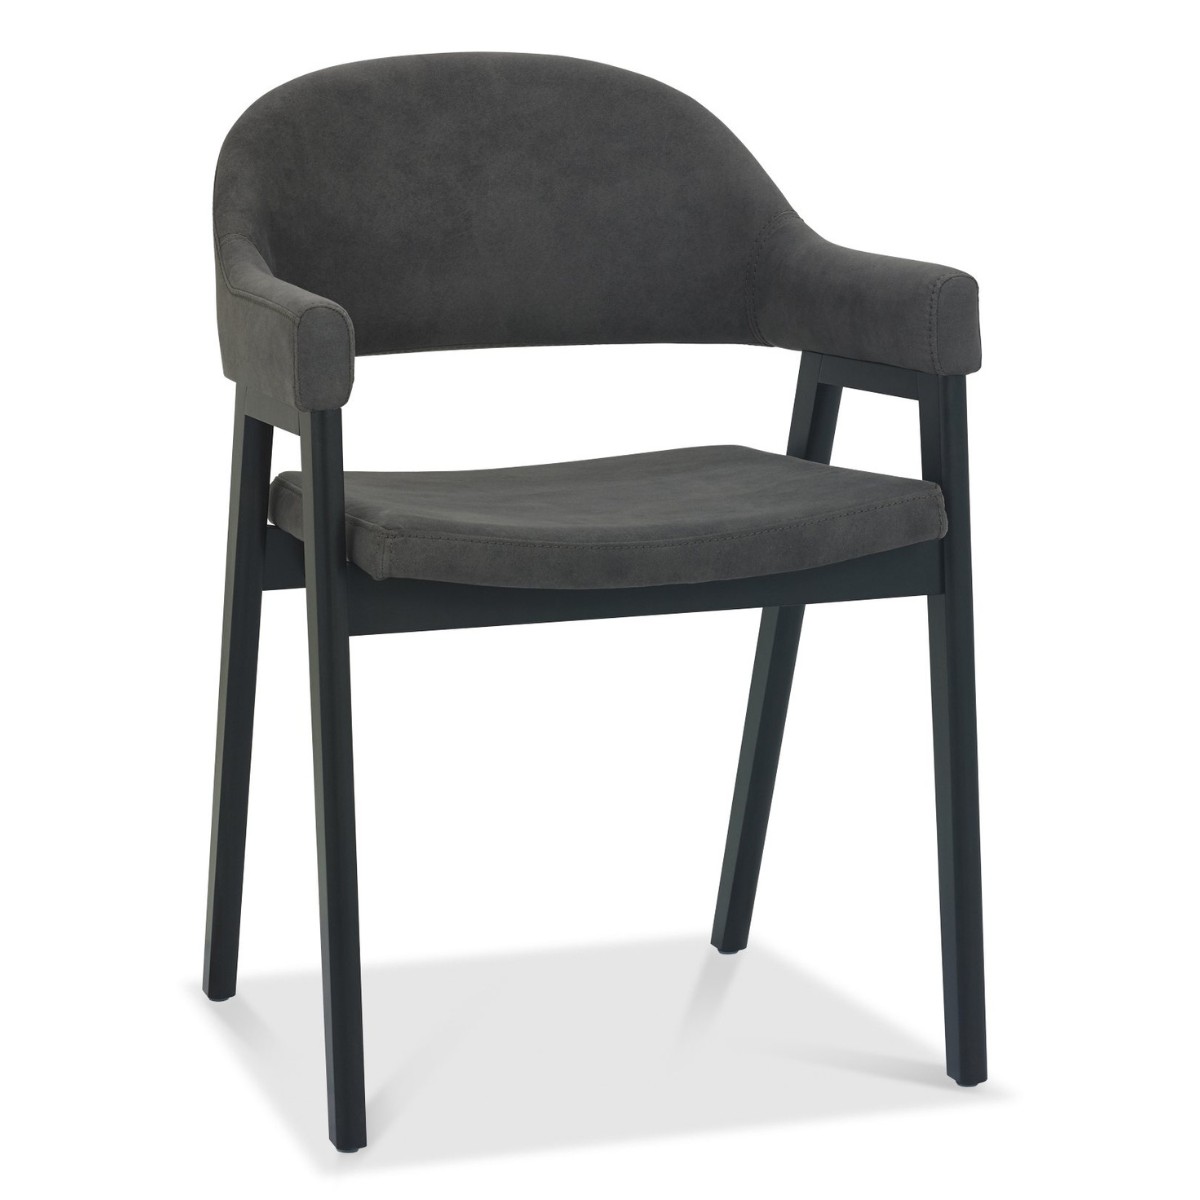 Chambery Weathered Oak Curved Back Dining Chair Grey- 1